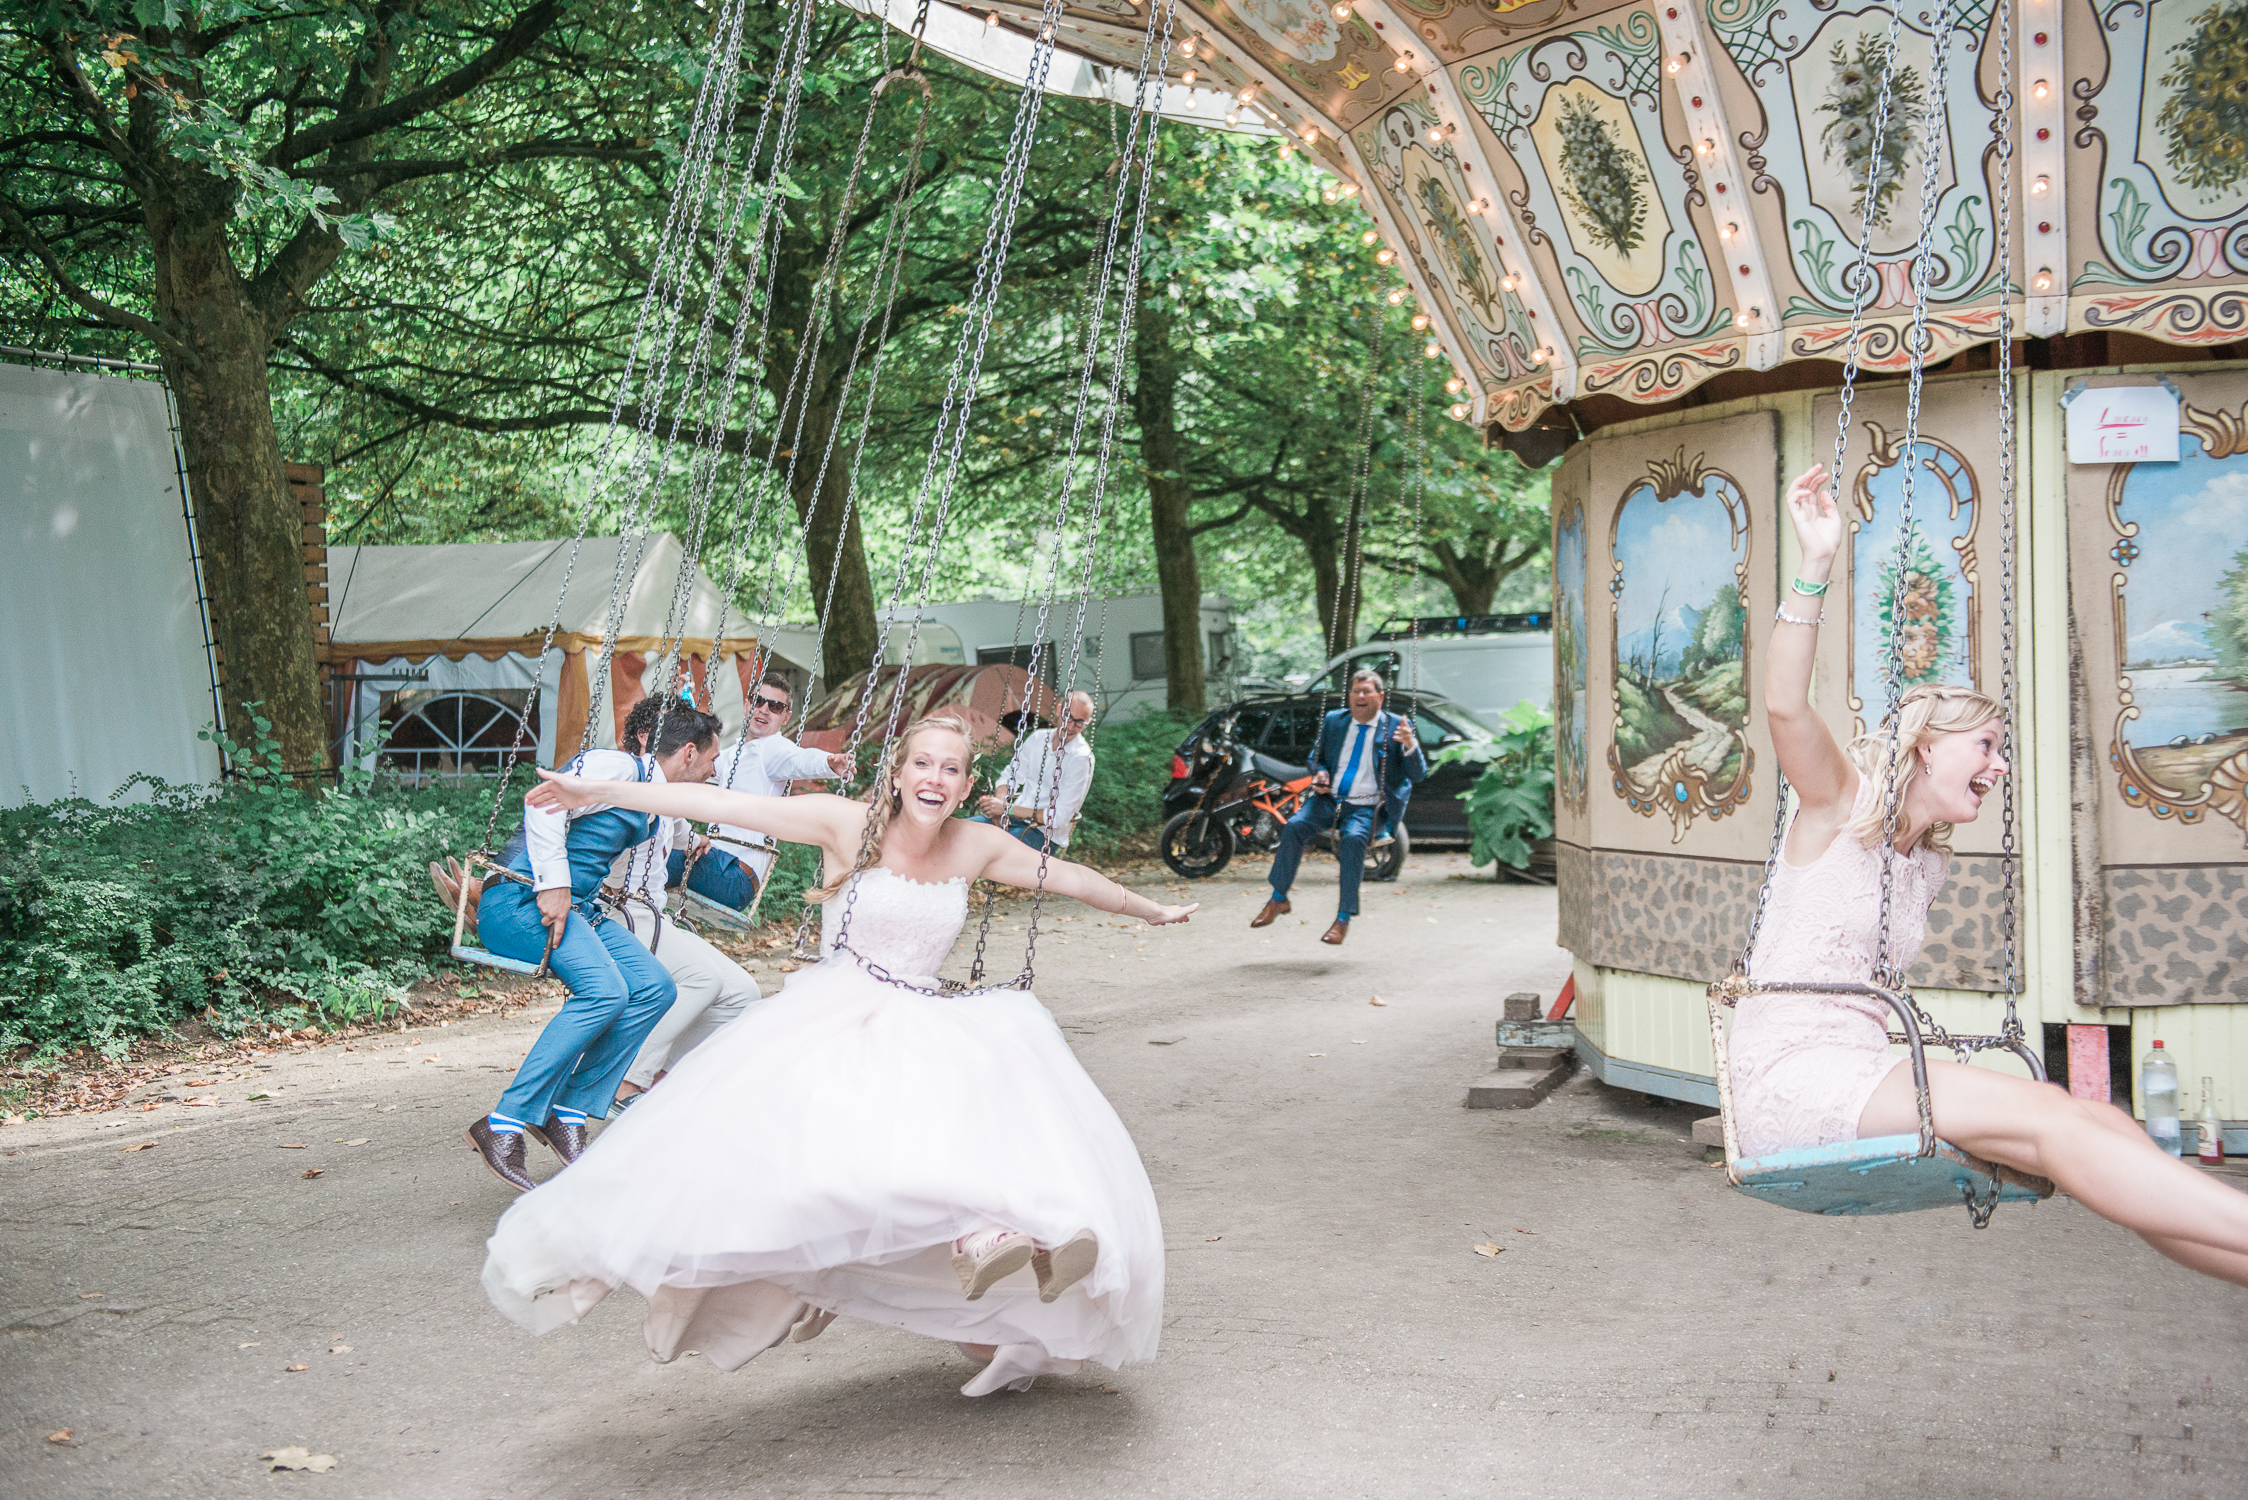 Bride in a carousel at a festival wedding at de lievelinge